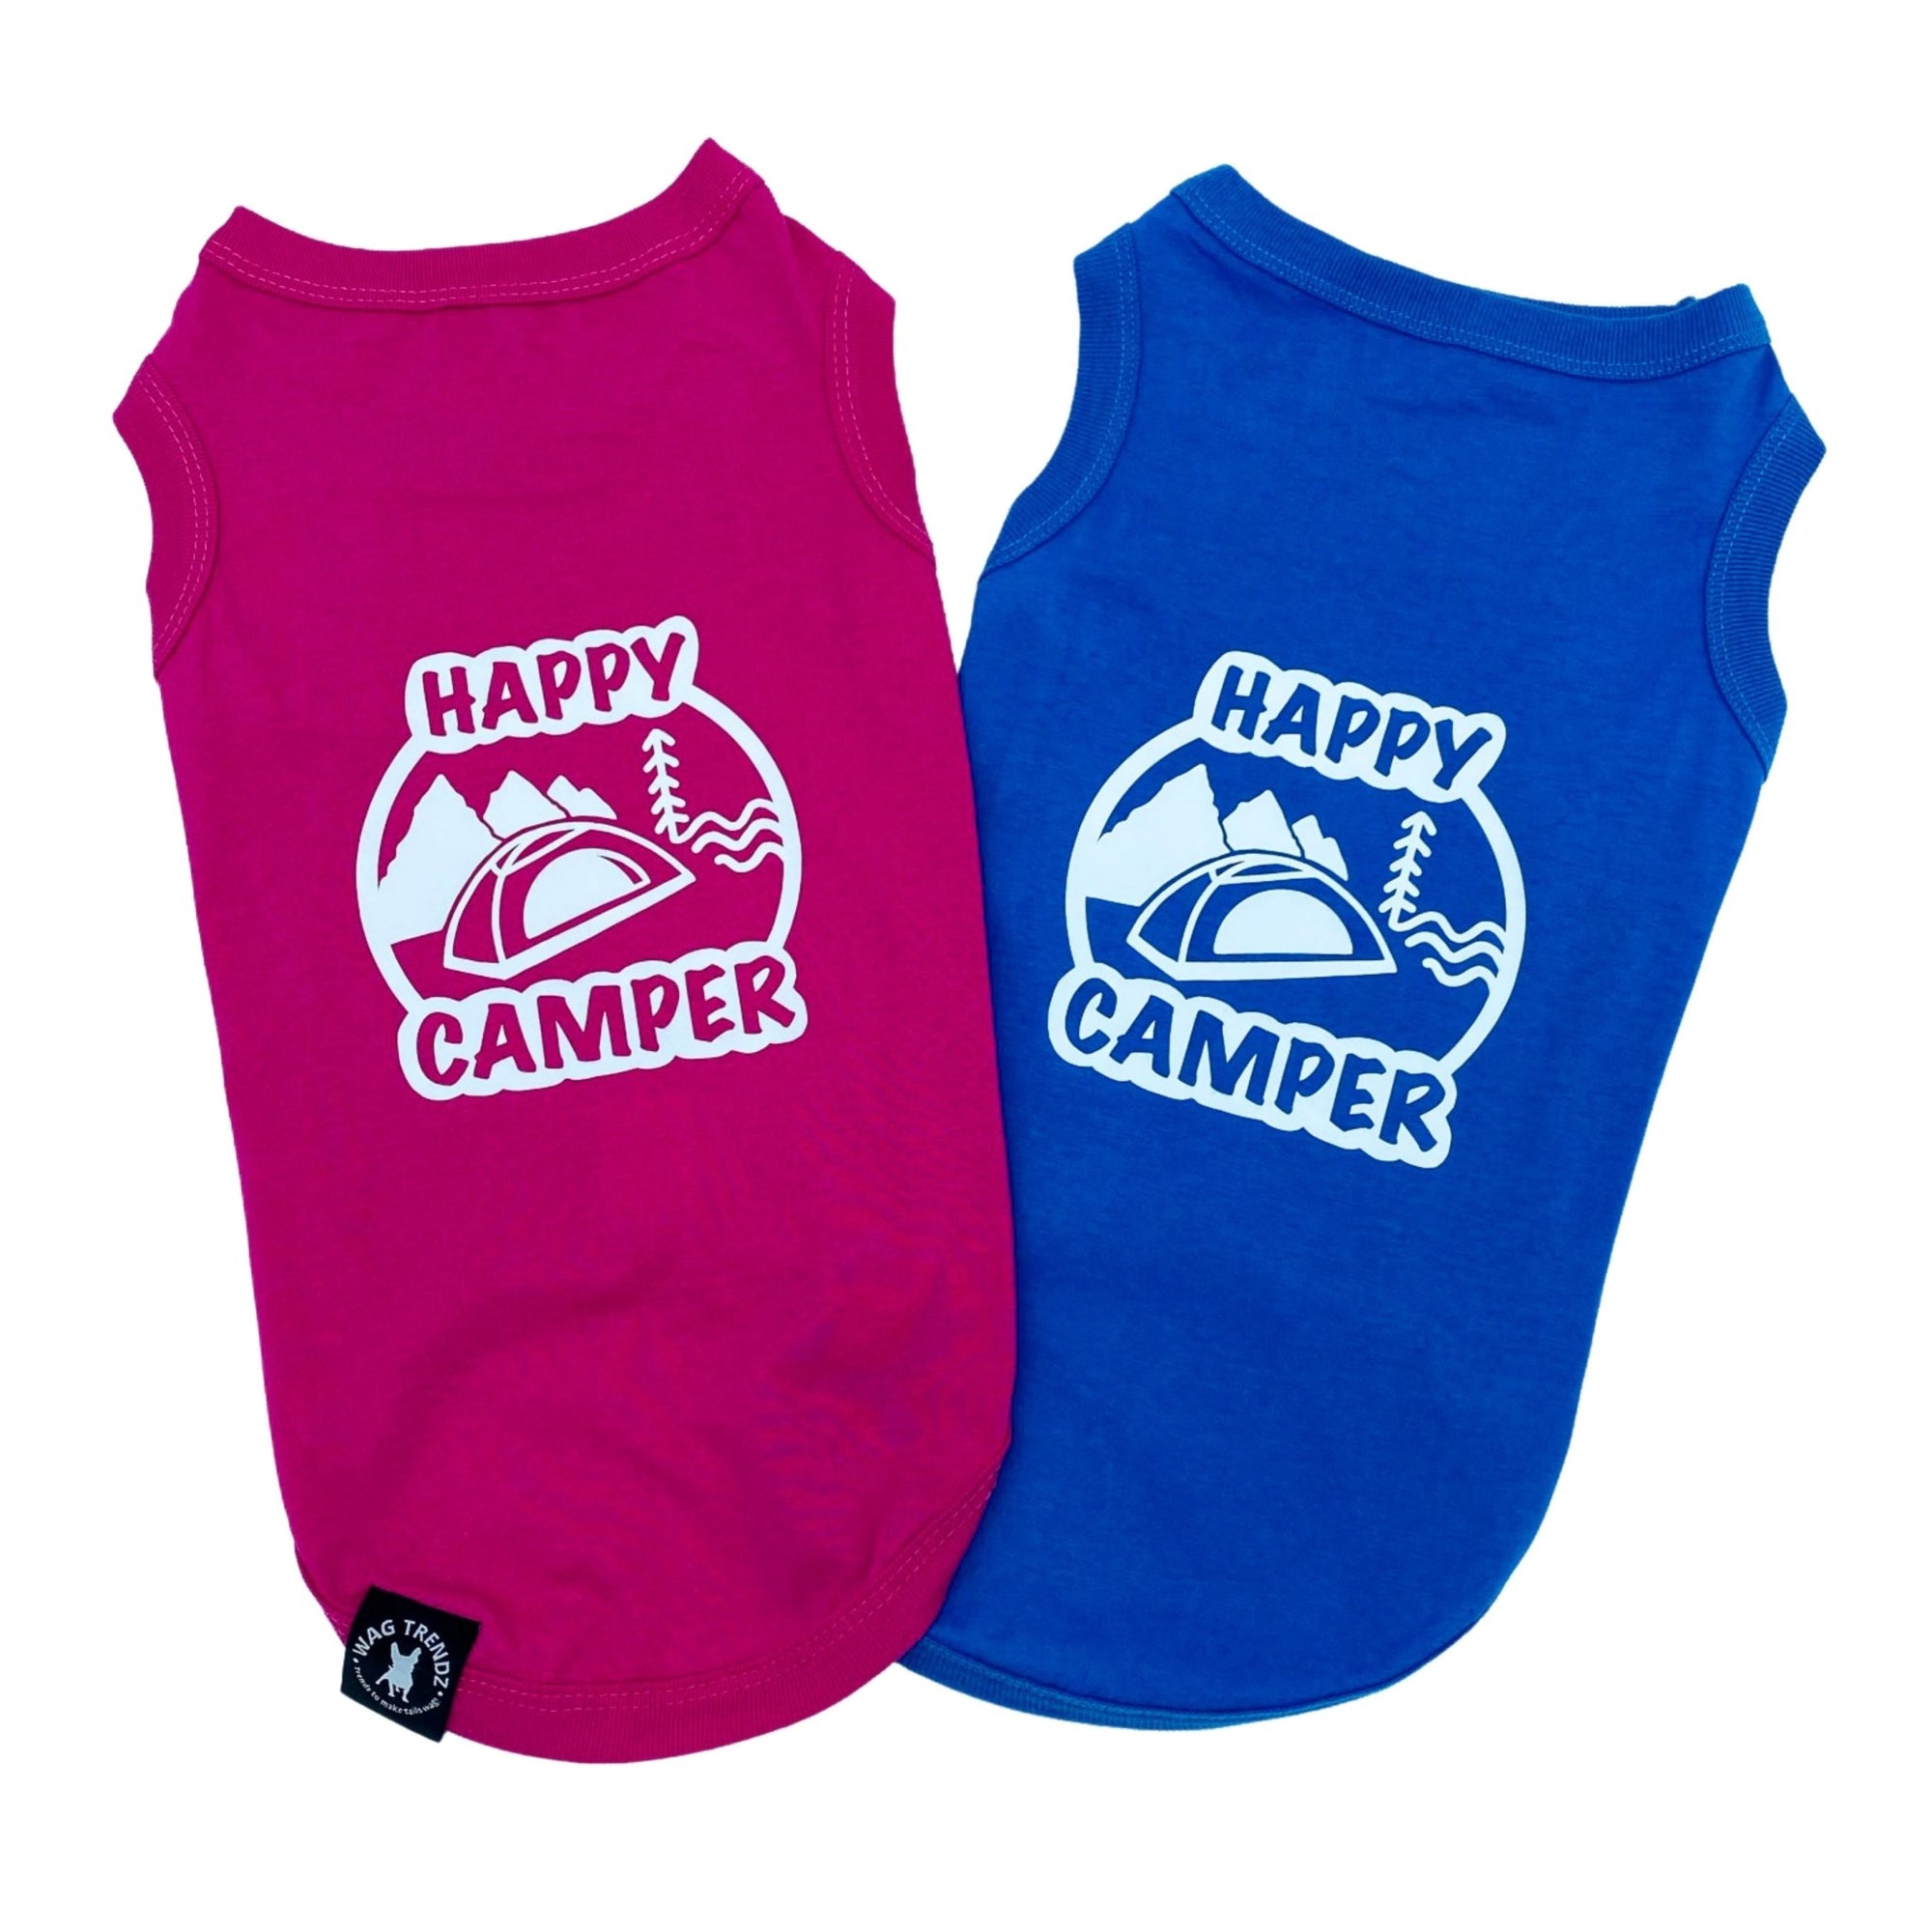 Dog T-Shirt - &quot;Happy Camper&quot; dog t-shirt - Hot Pink and Royal Blue - back view with Happy Camper and camping scene - against solid white background - Wag Trendz